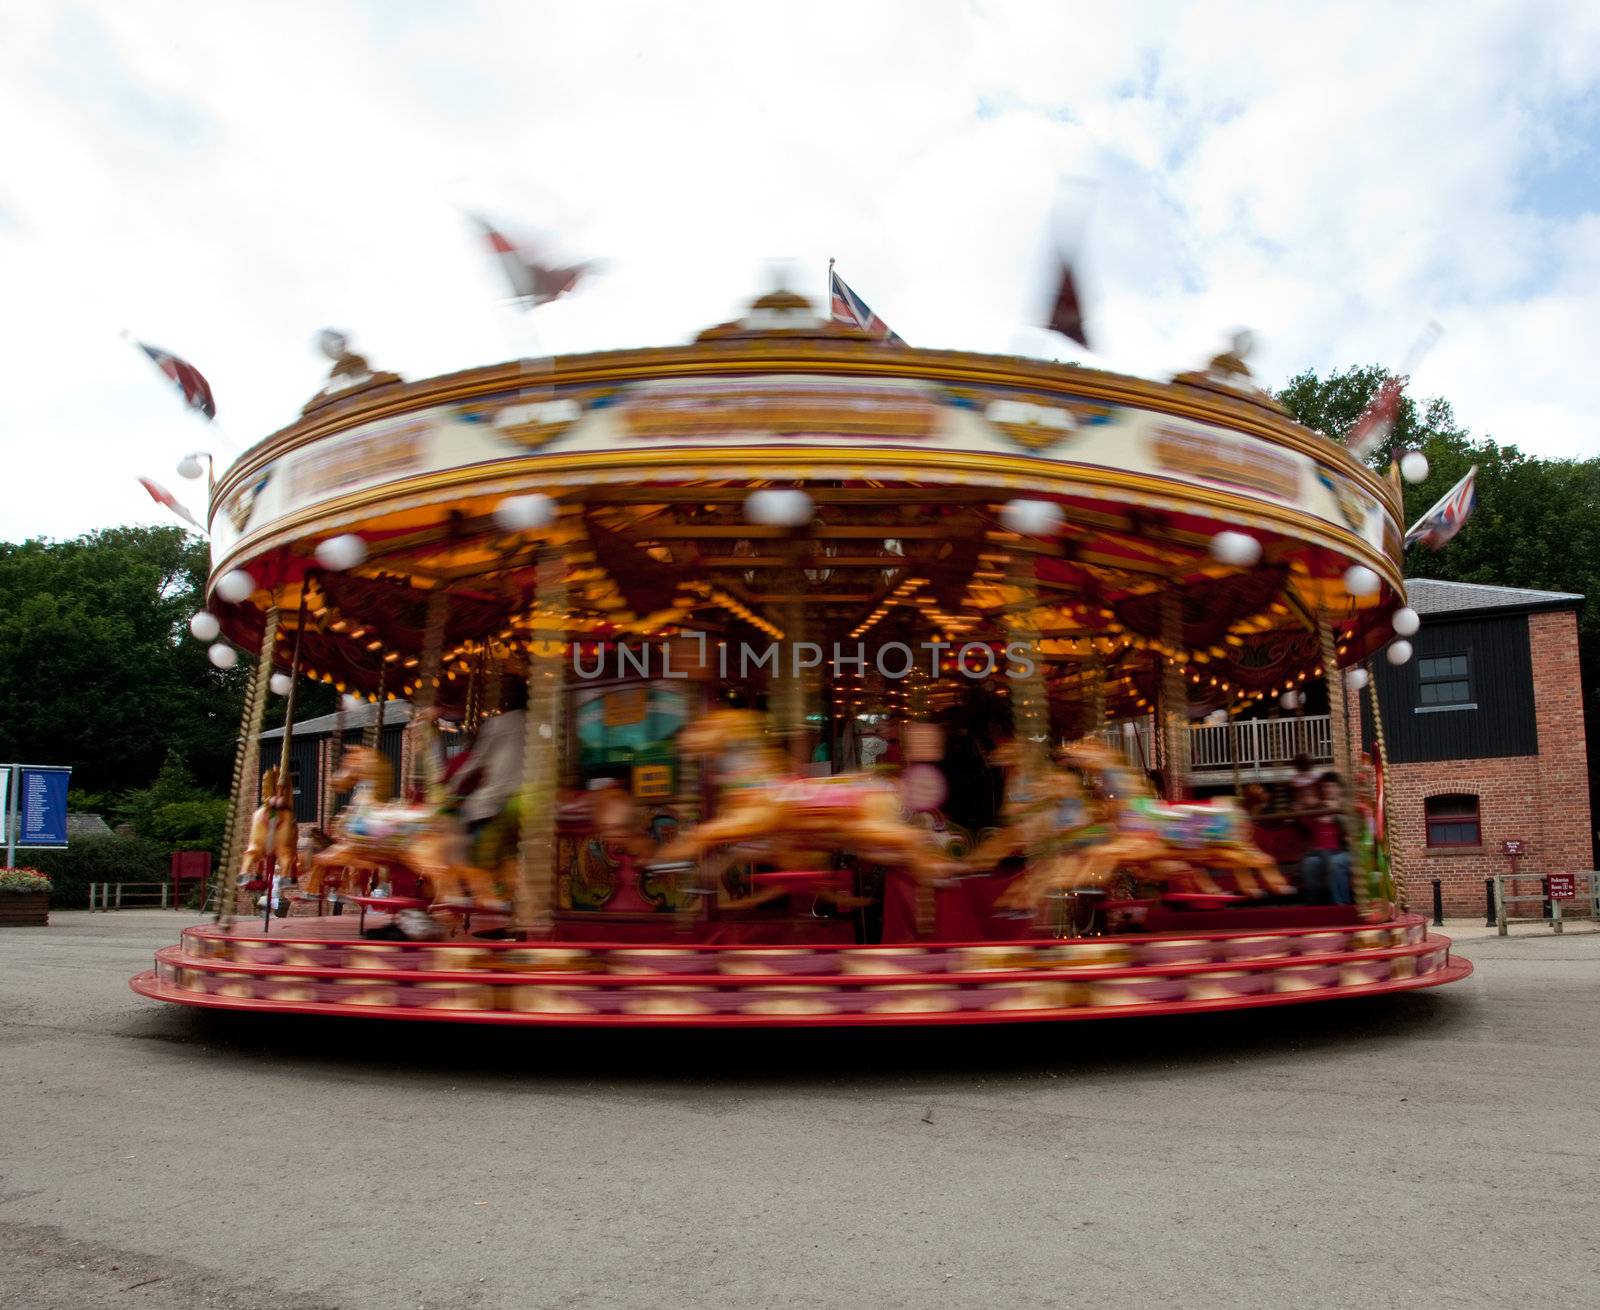 Old merry go round by steheap